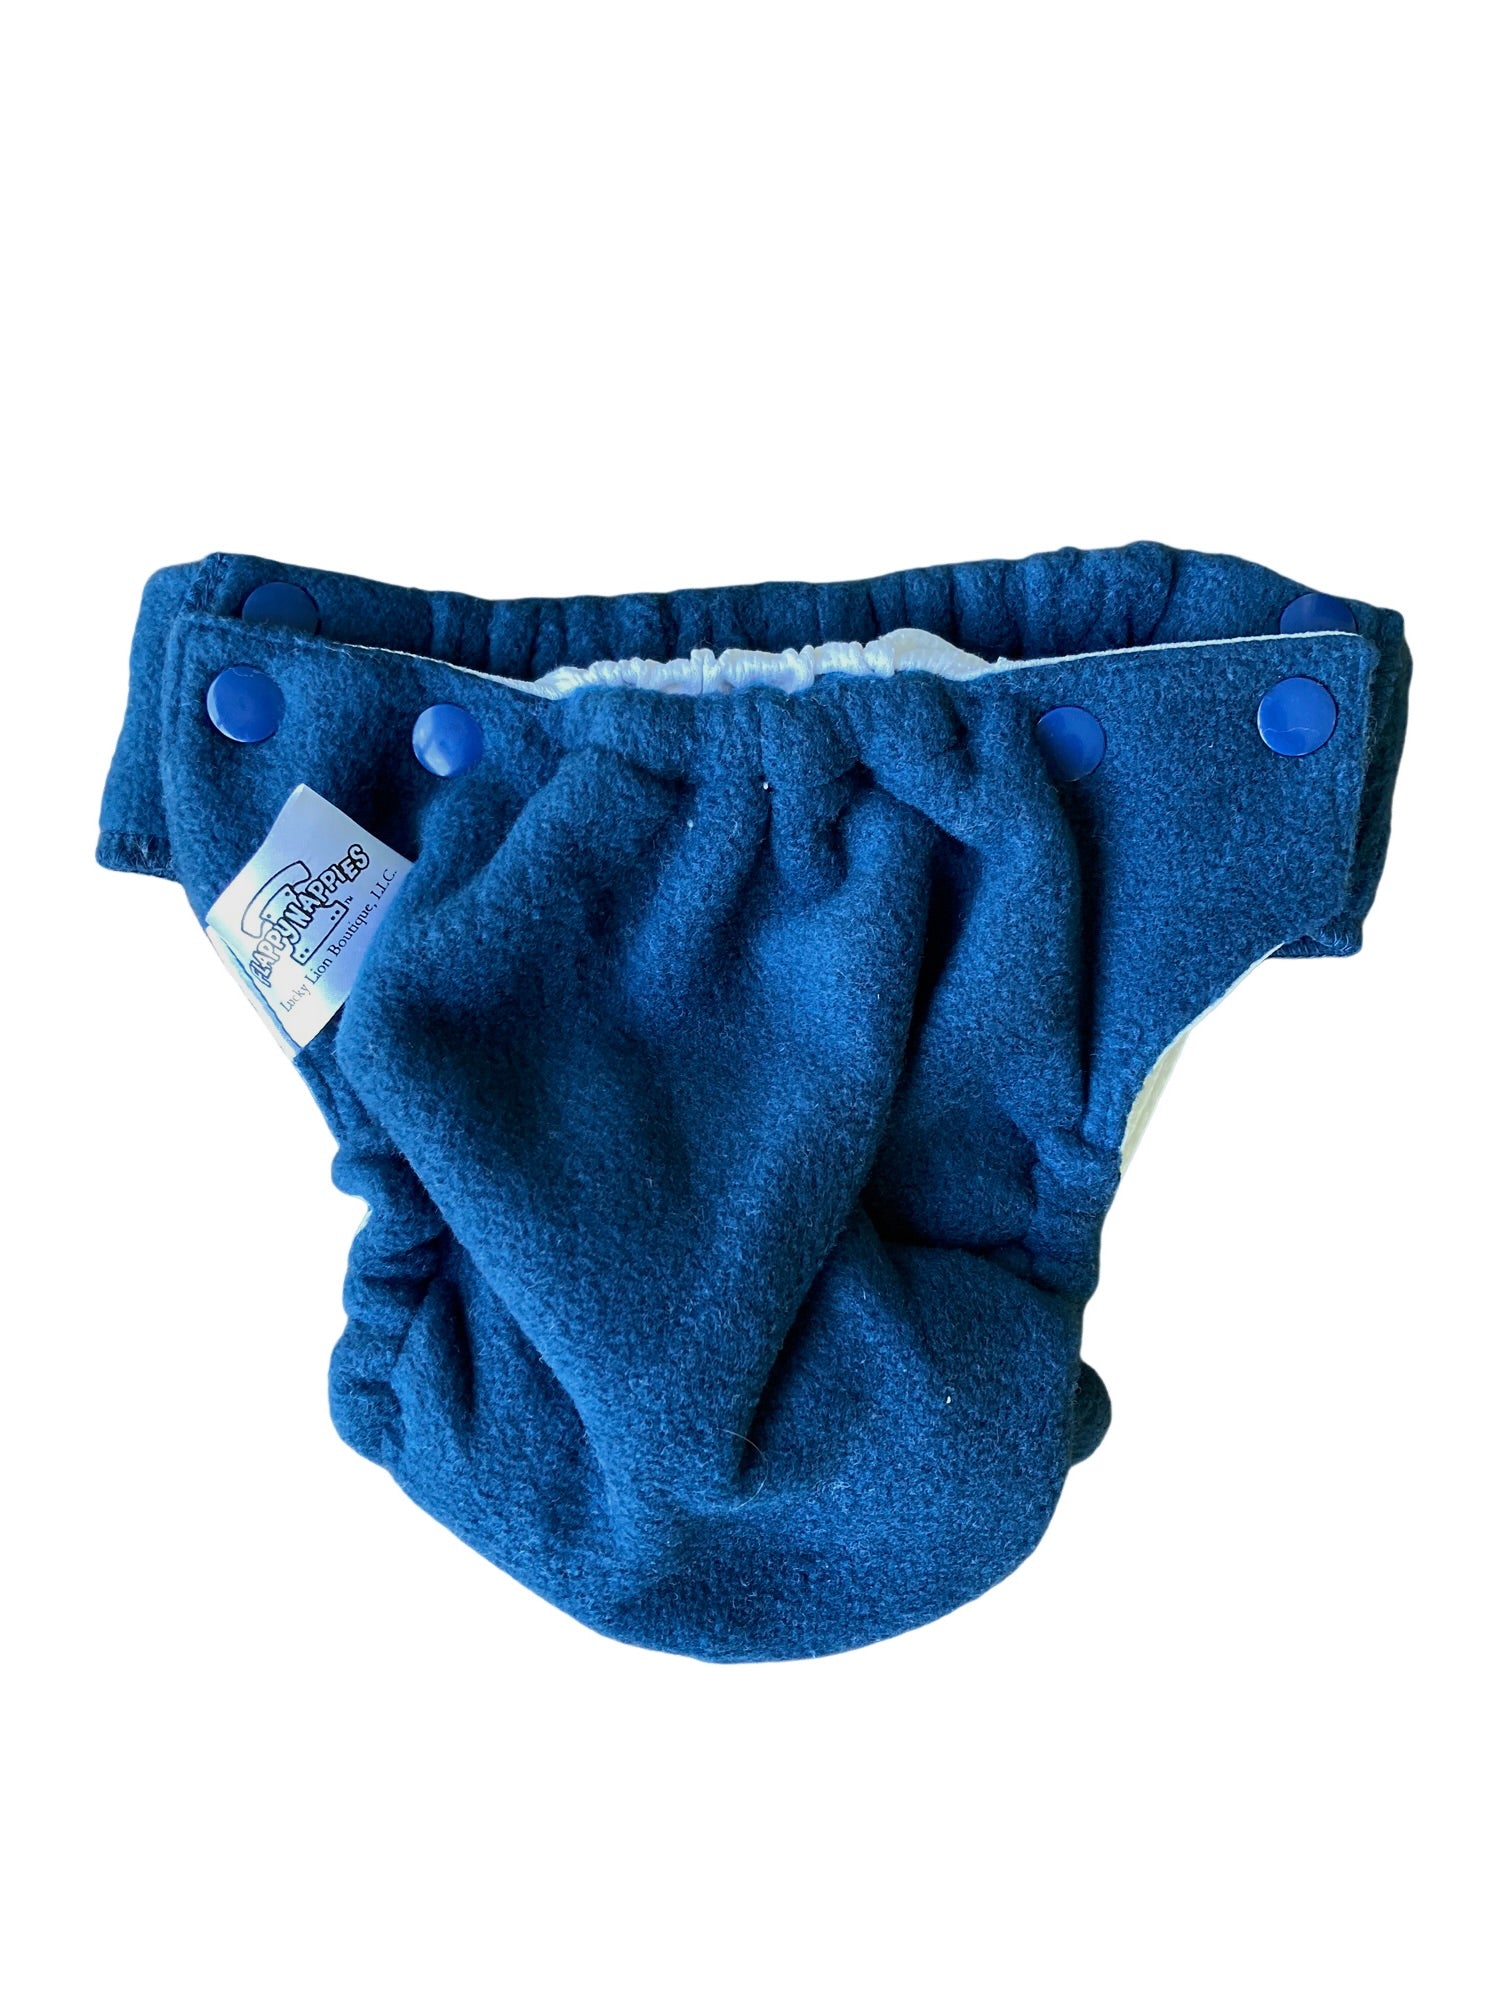 Royal Blue Flappy-Nappy Pocket Diaper 3-Pack